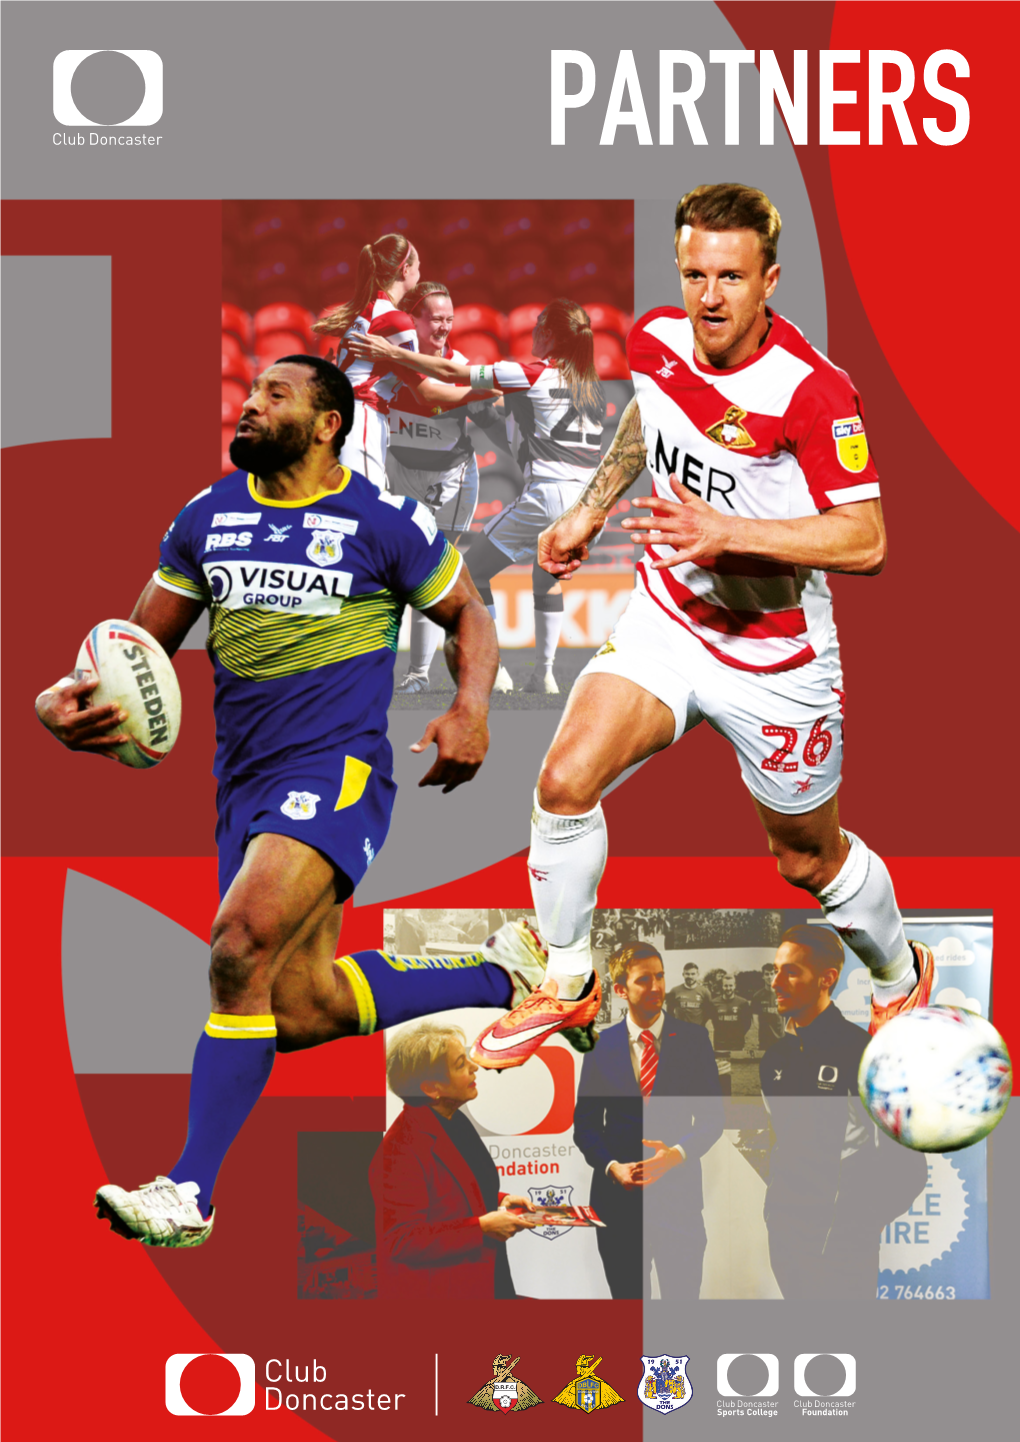 DONCASTER RLFC Doncaster Rugby League Football Club Is a Professional Rugby League Football Club, Playing at the Keepmoat Stadium